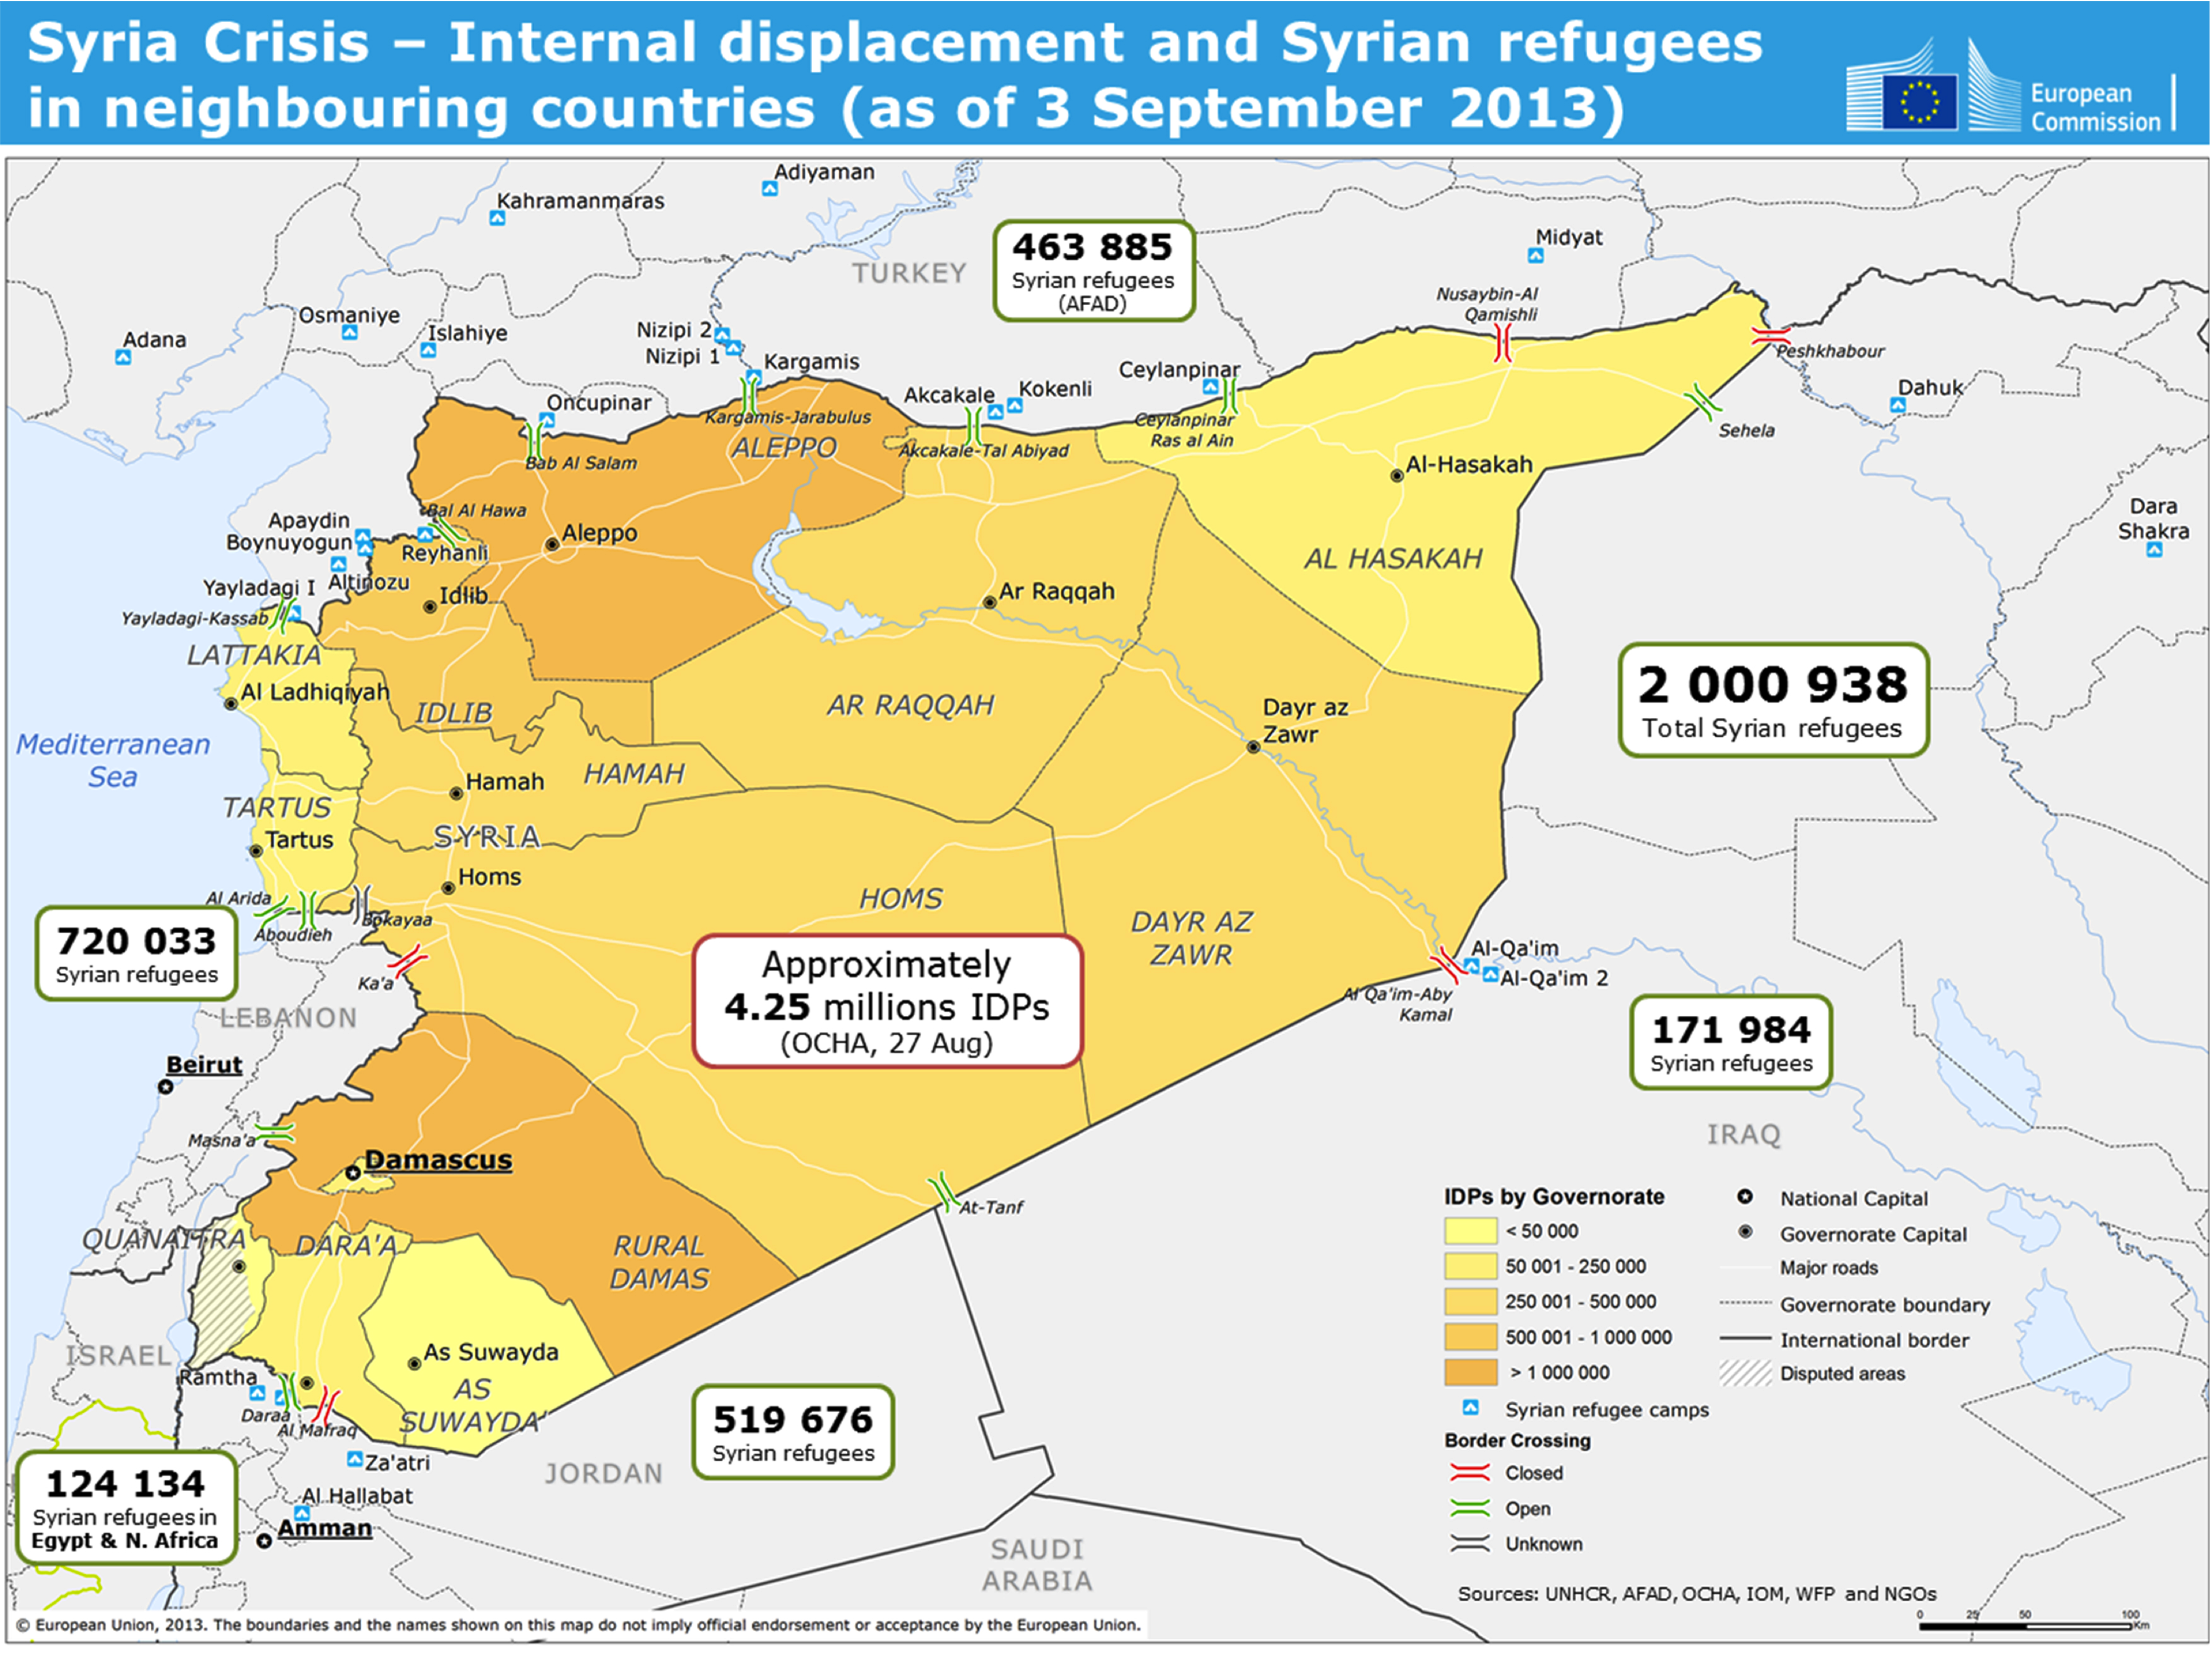 Distribution of Syrian refugees